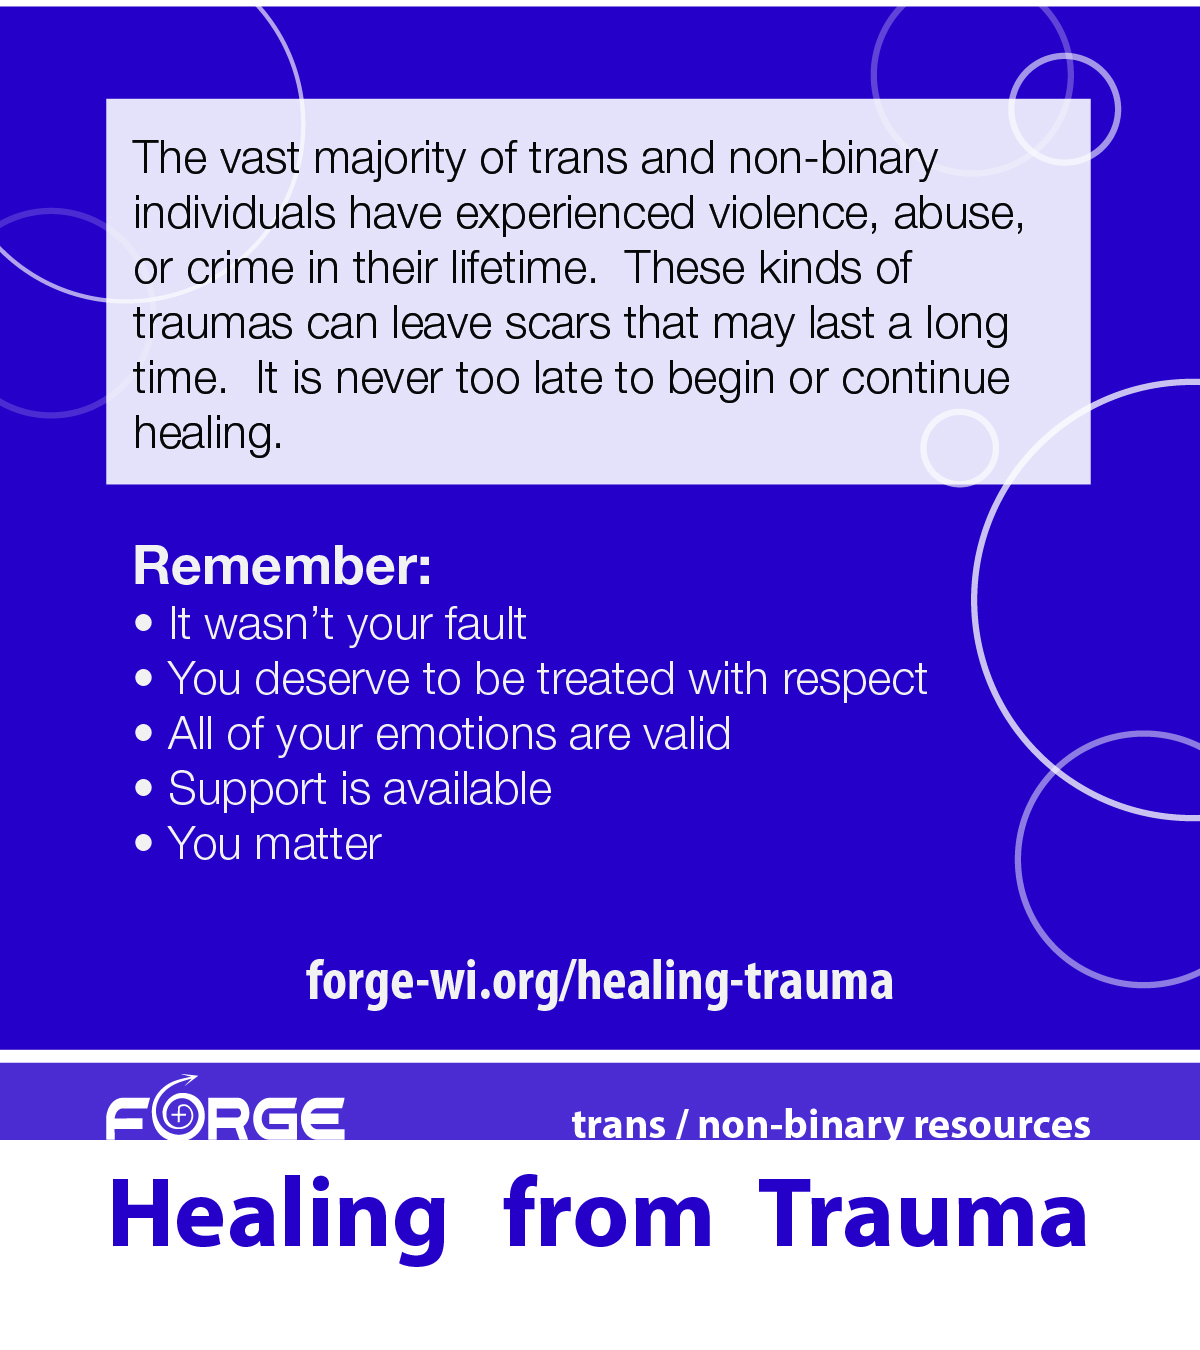 VOCA healing from trauma palm card front